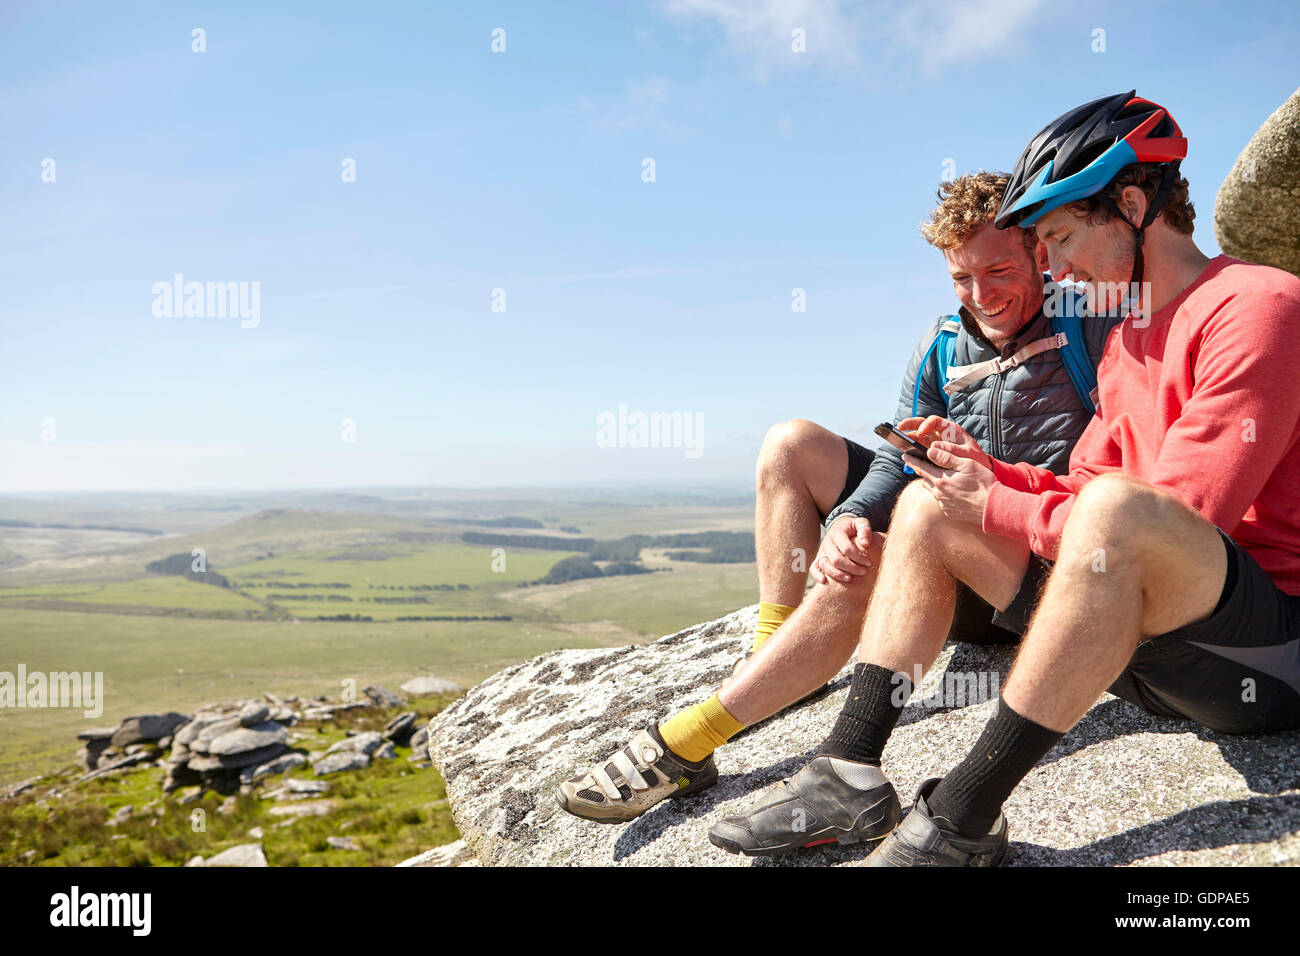 Cyclists resting on rocky outcrop Stock Photo